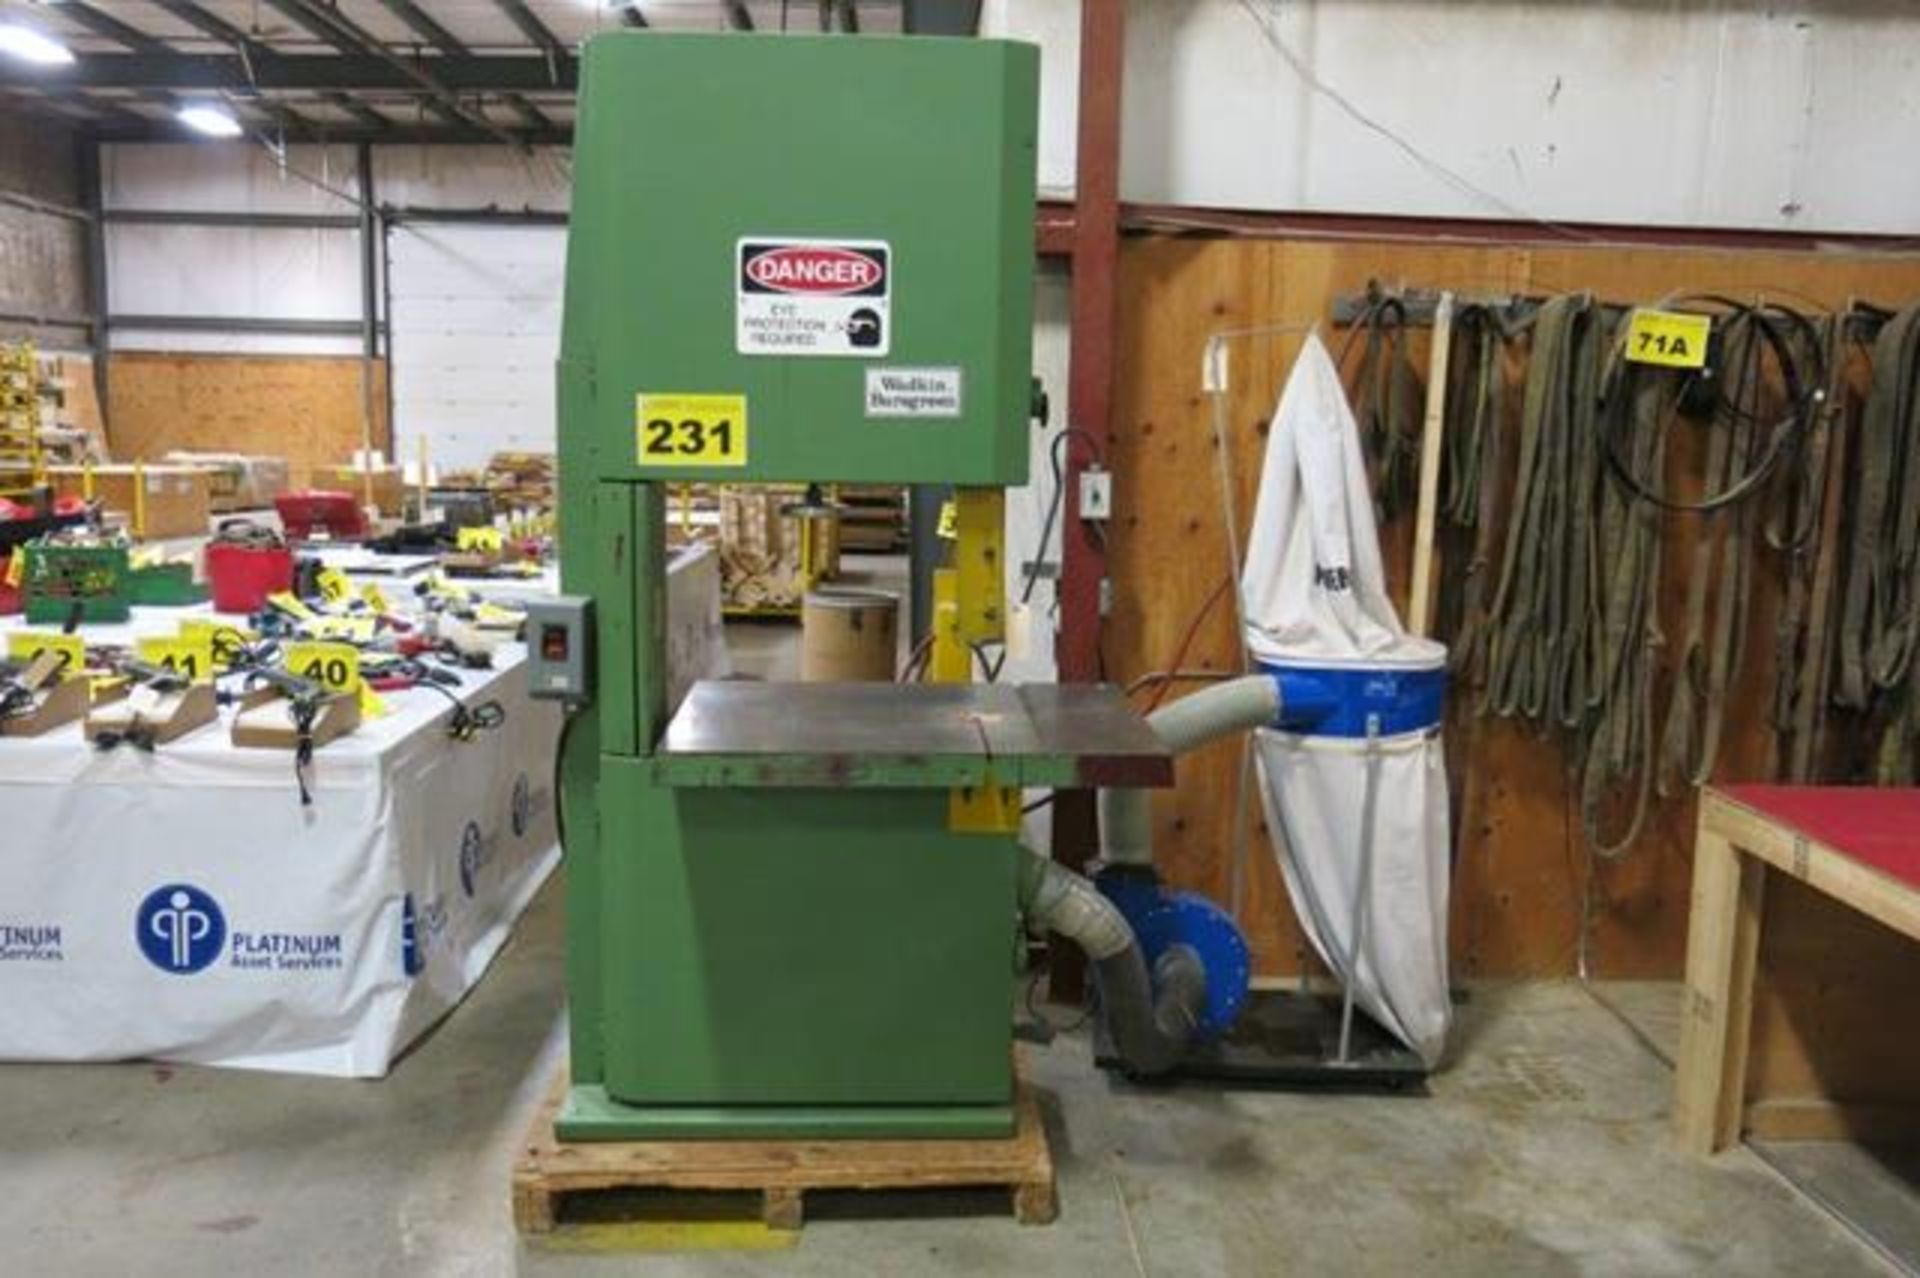 WADKIN BURSGREEN, C7, VERTICAL BAND SAW WITH DUST COLLECTOR (RIGGING - $125)